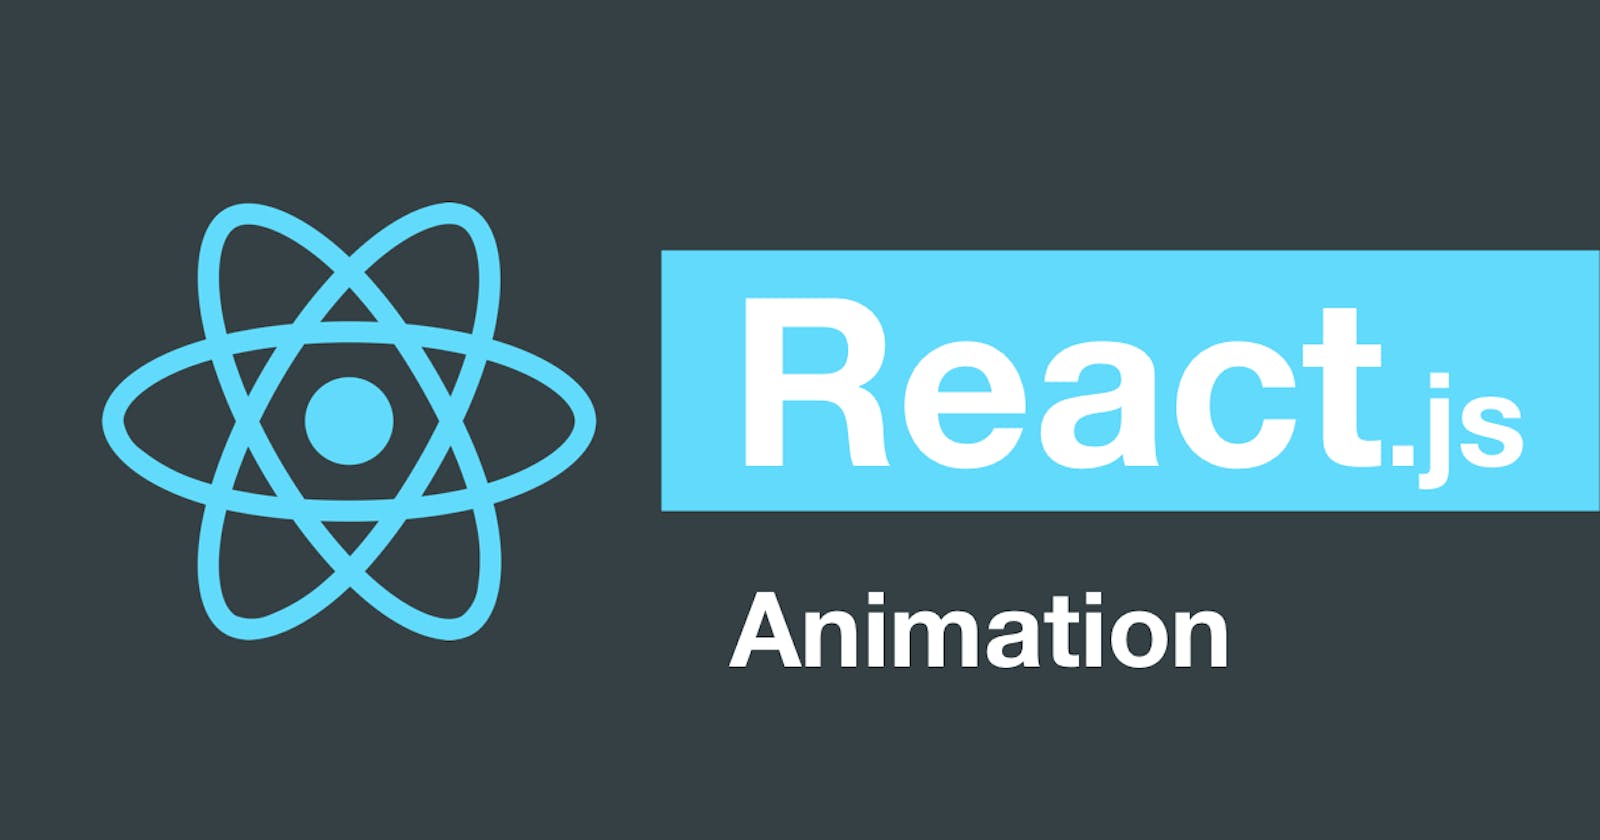 Popular Animation libraries for React